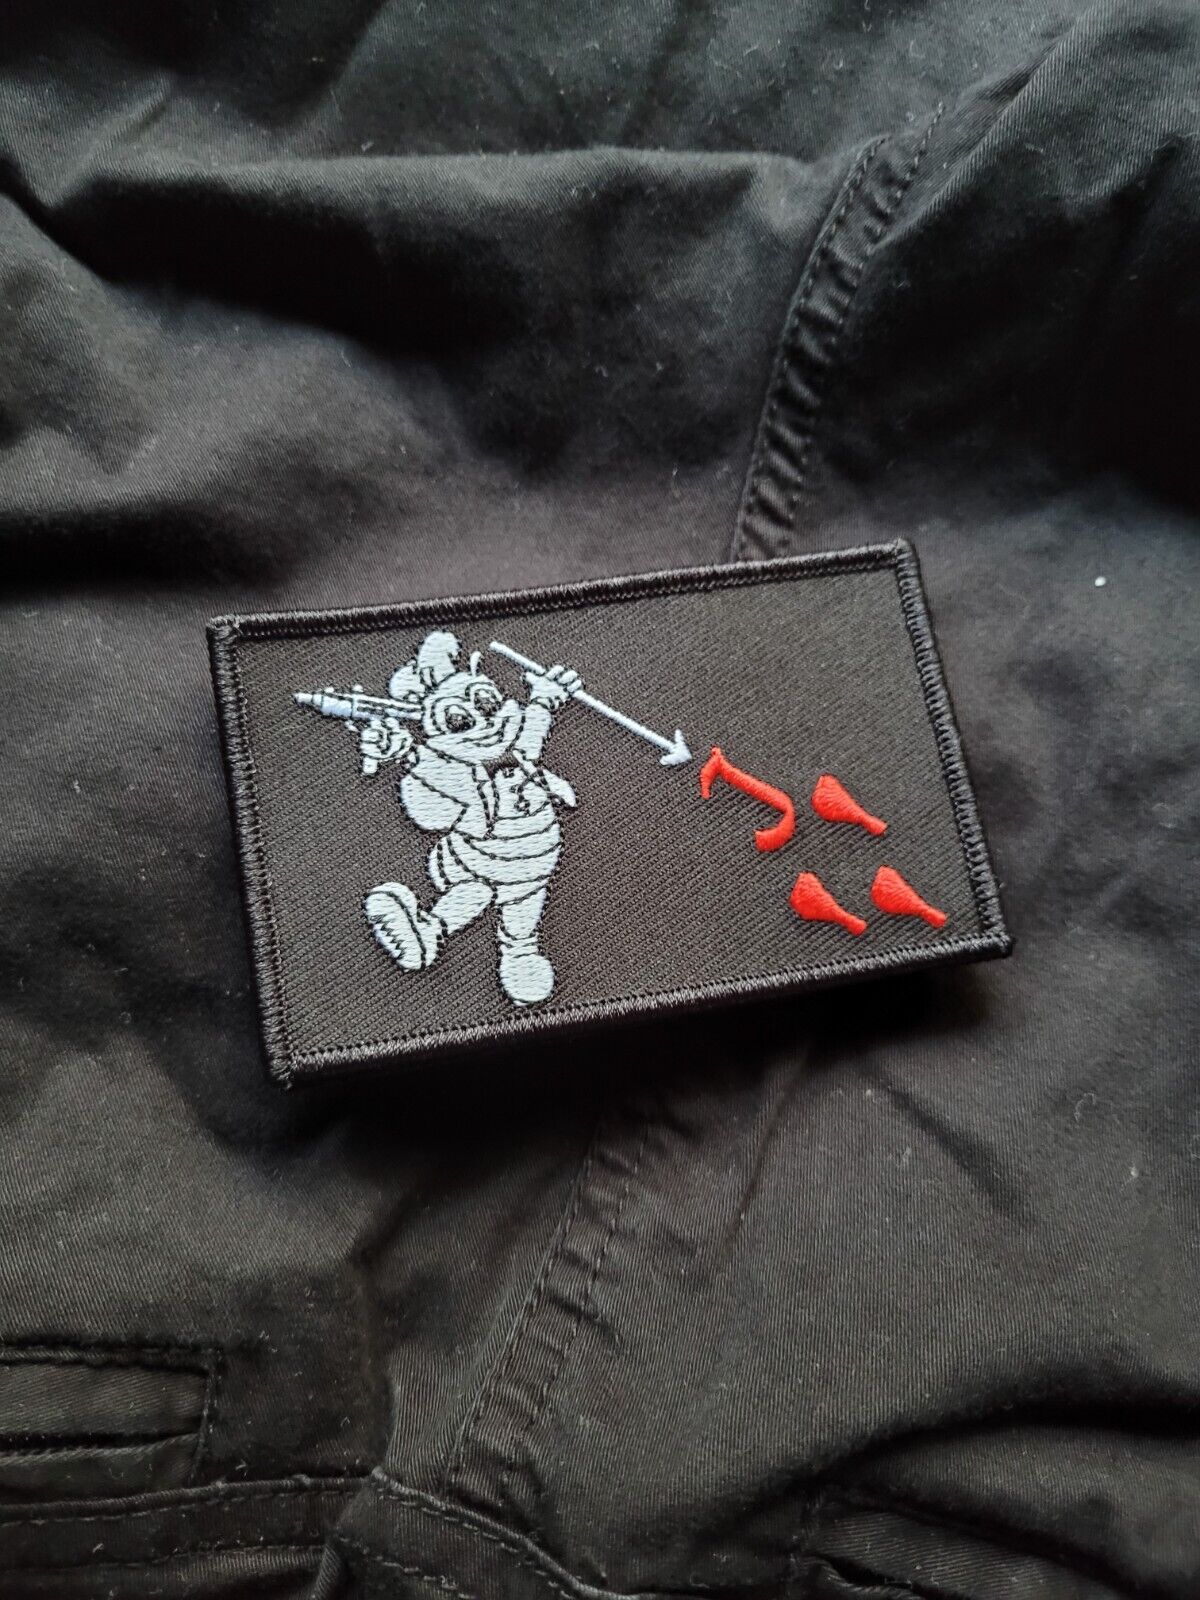 Armed Forces of the Philippines (AFP), Jollibee RUSFOR morale airsoft war patch